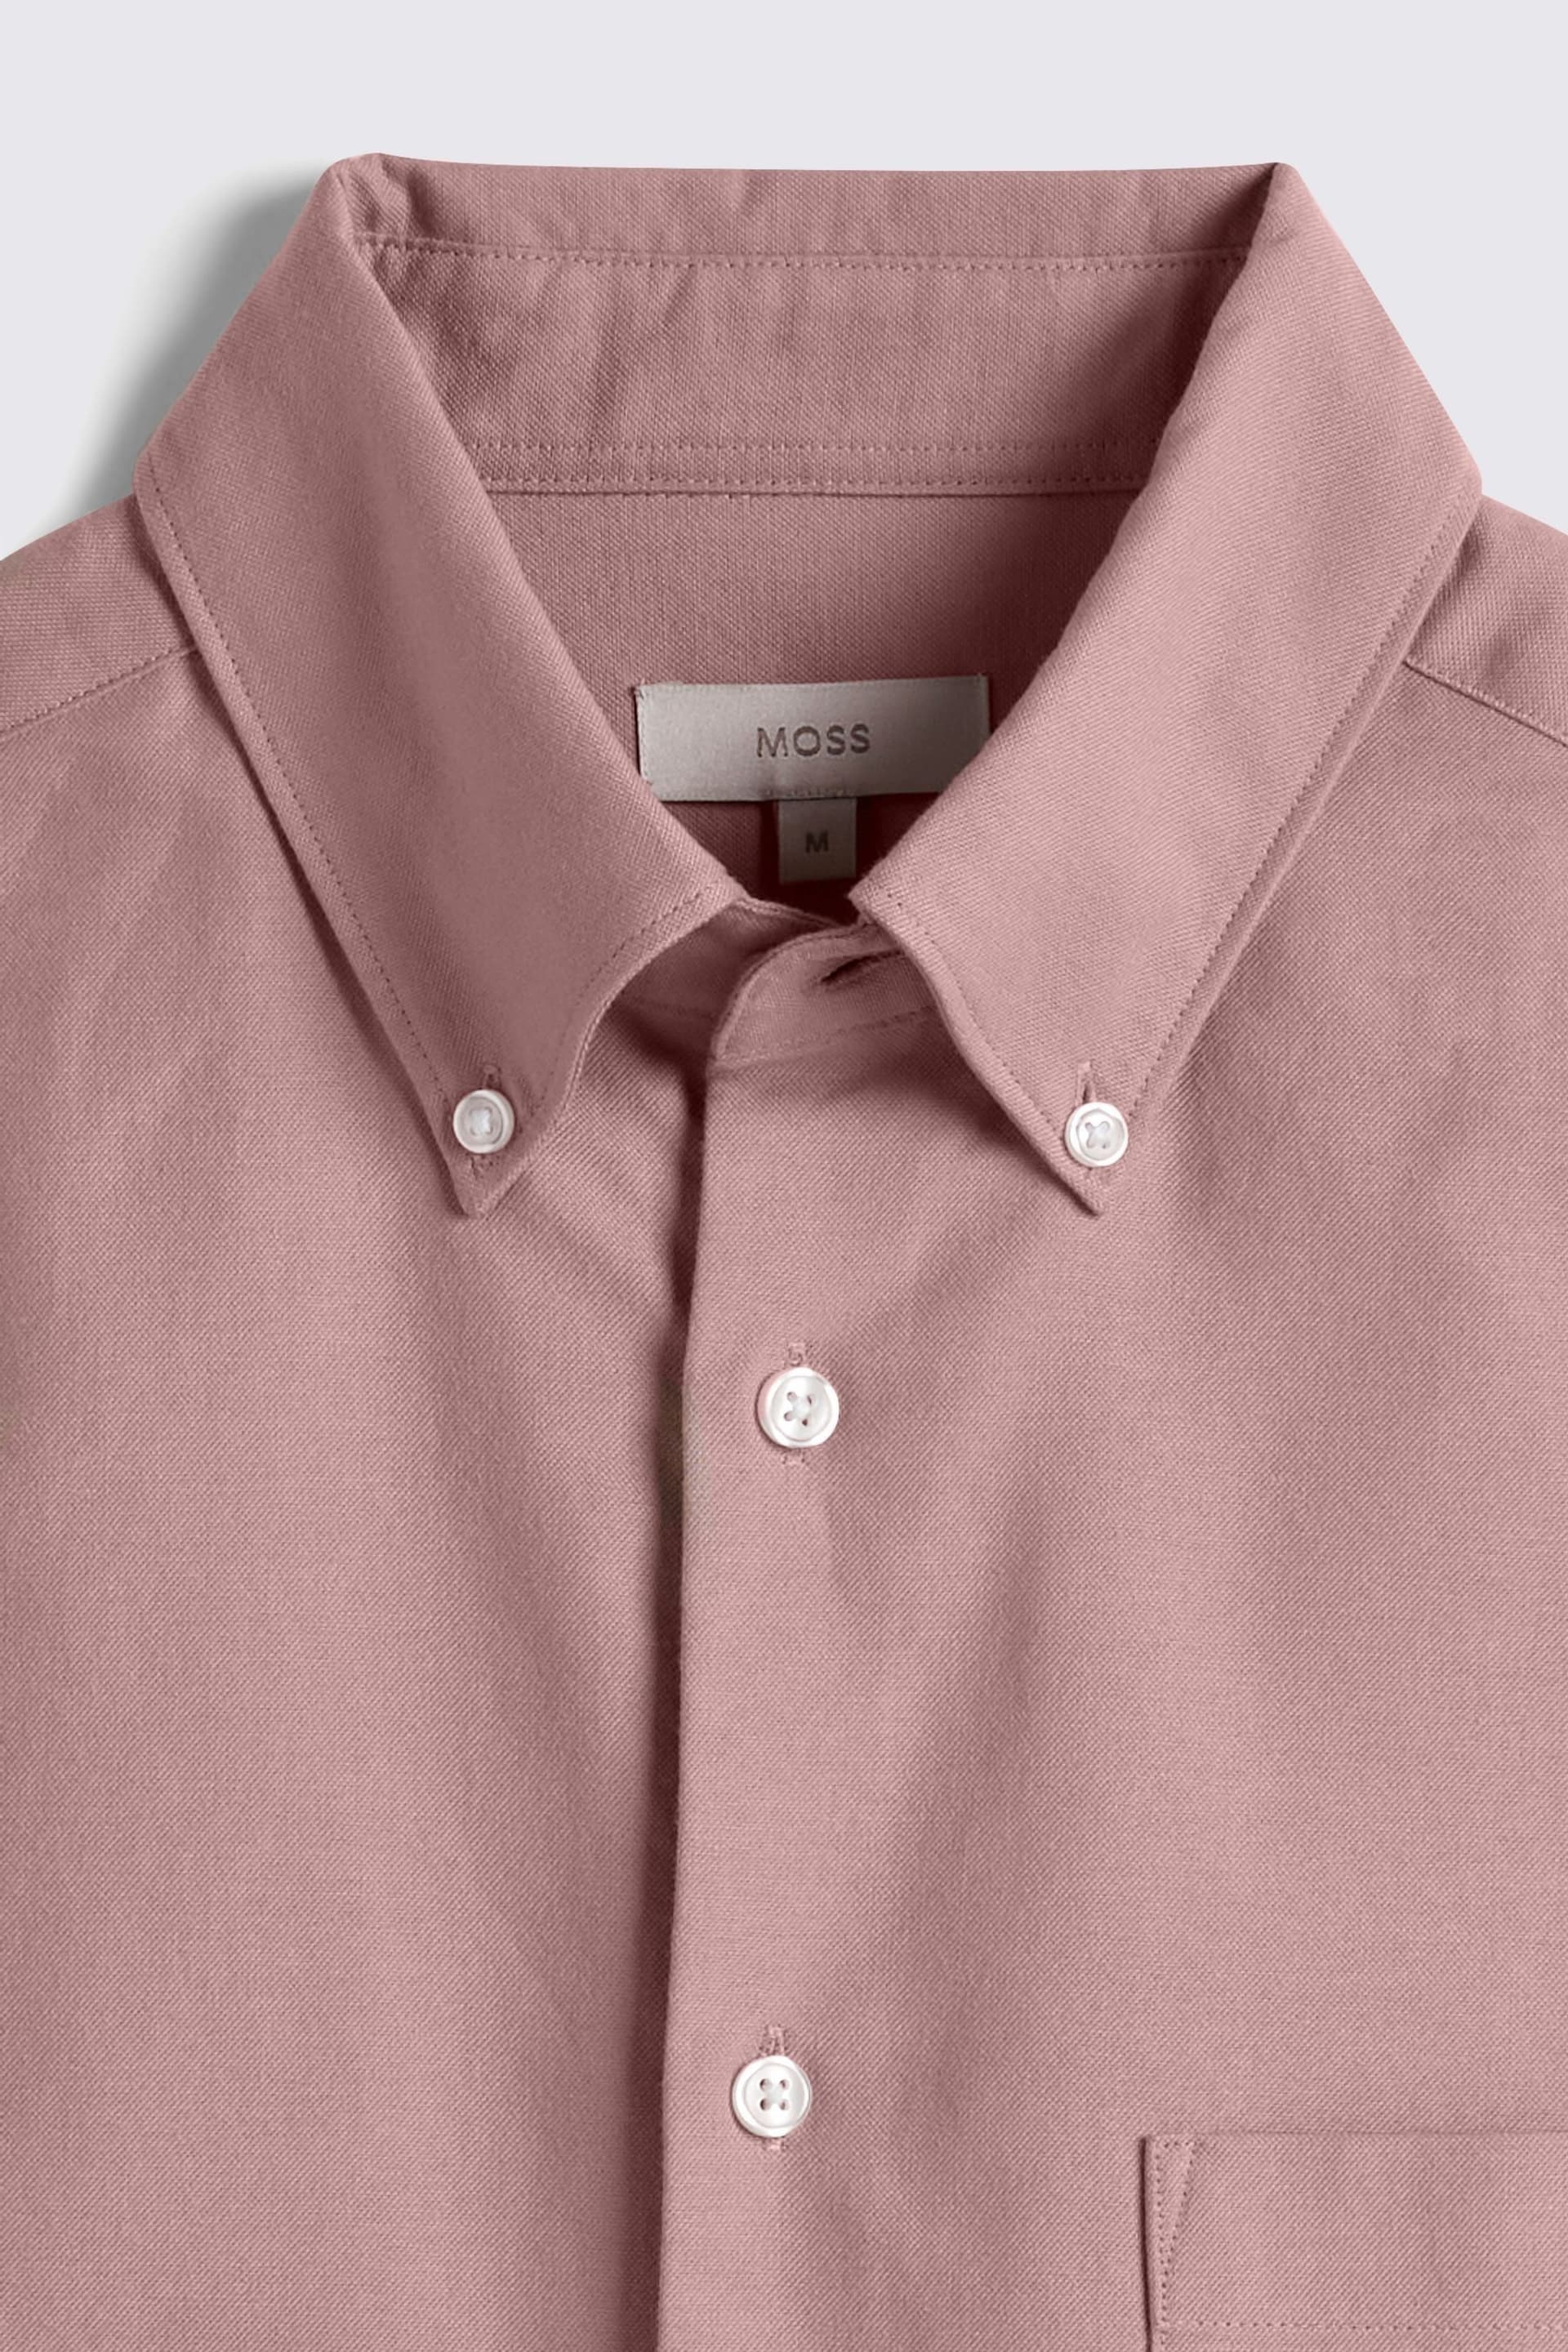 MOSS Pink Washed Oxford Shirt - Image 6 of 6